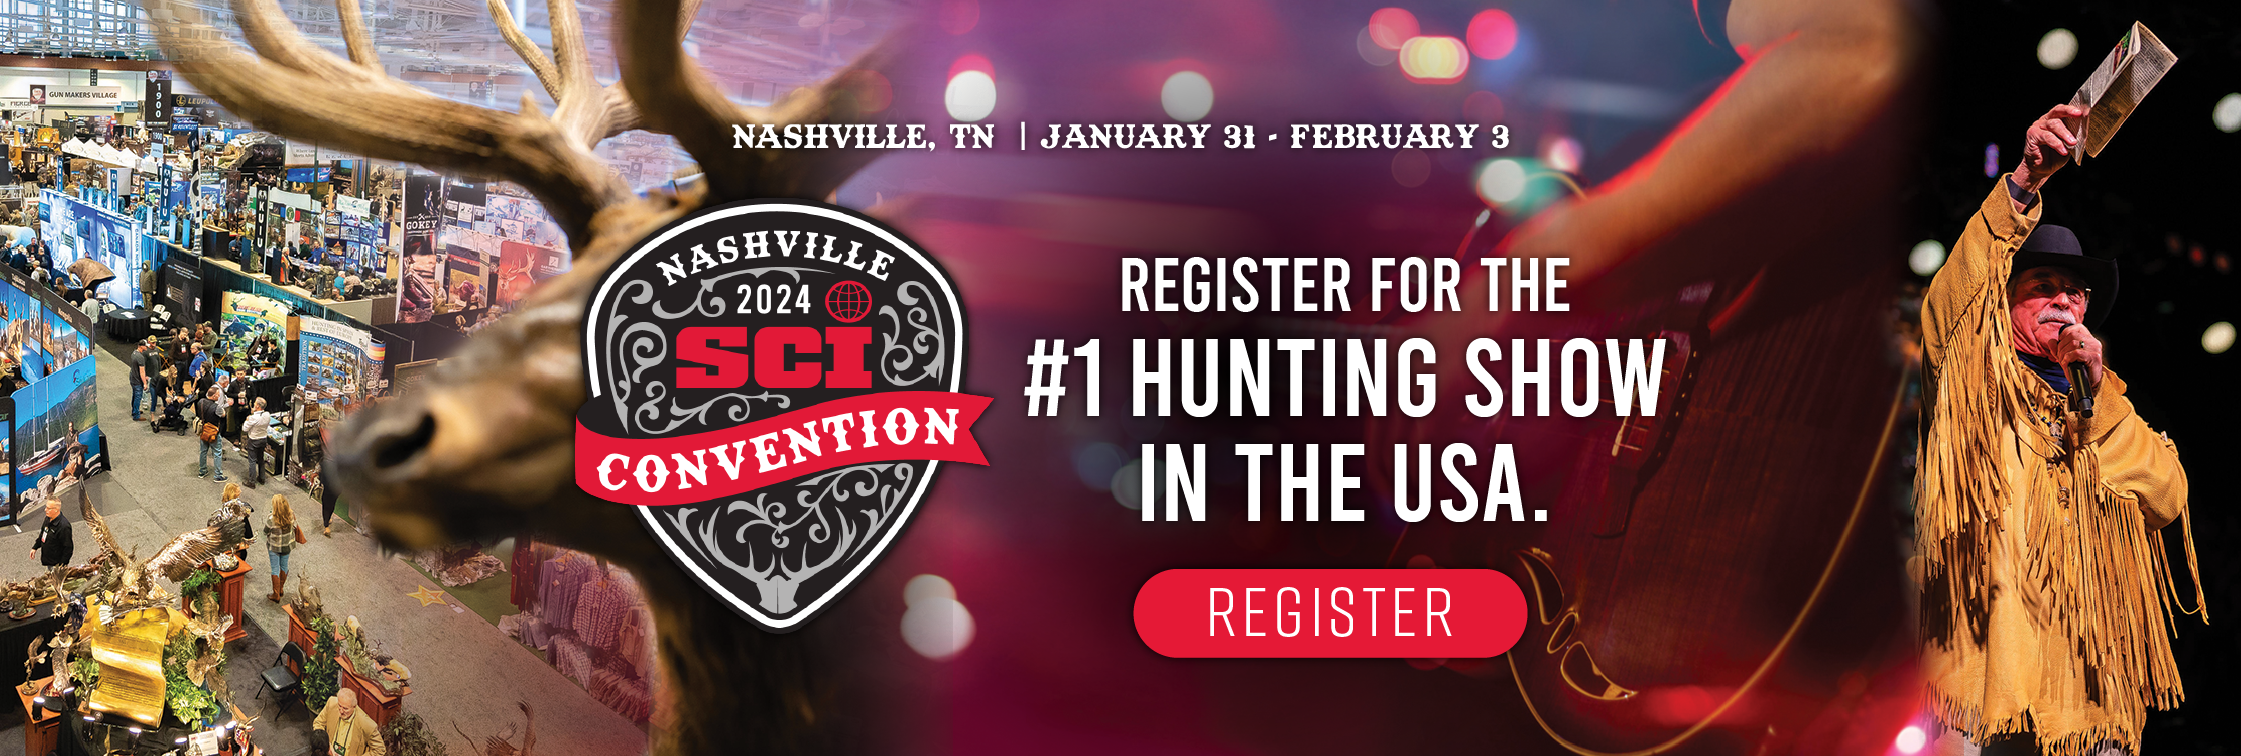 Come find your adventure at the #1 hunting show in the USA.